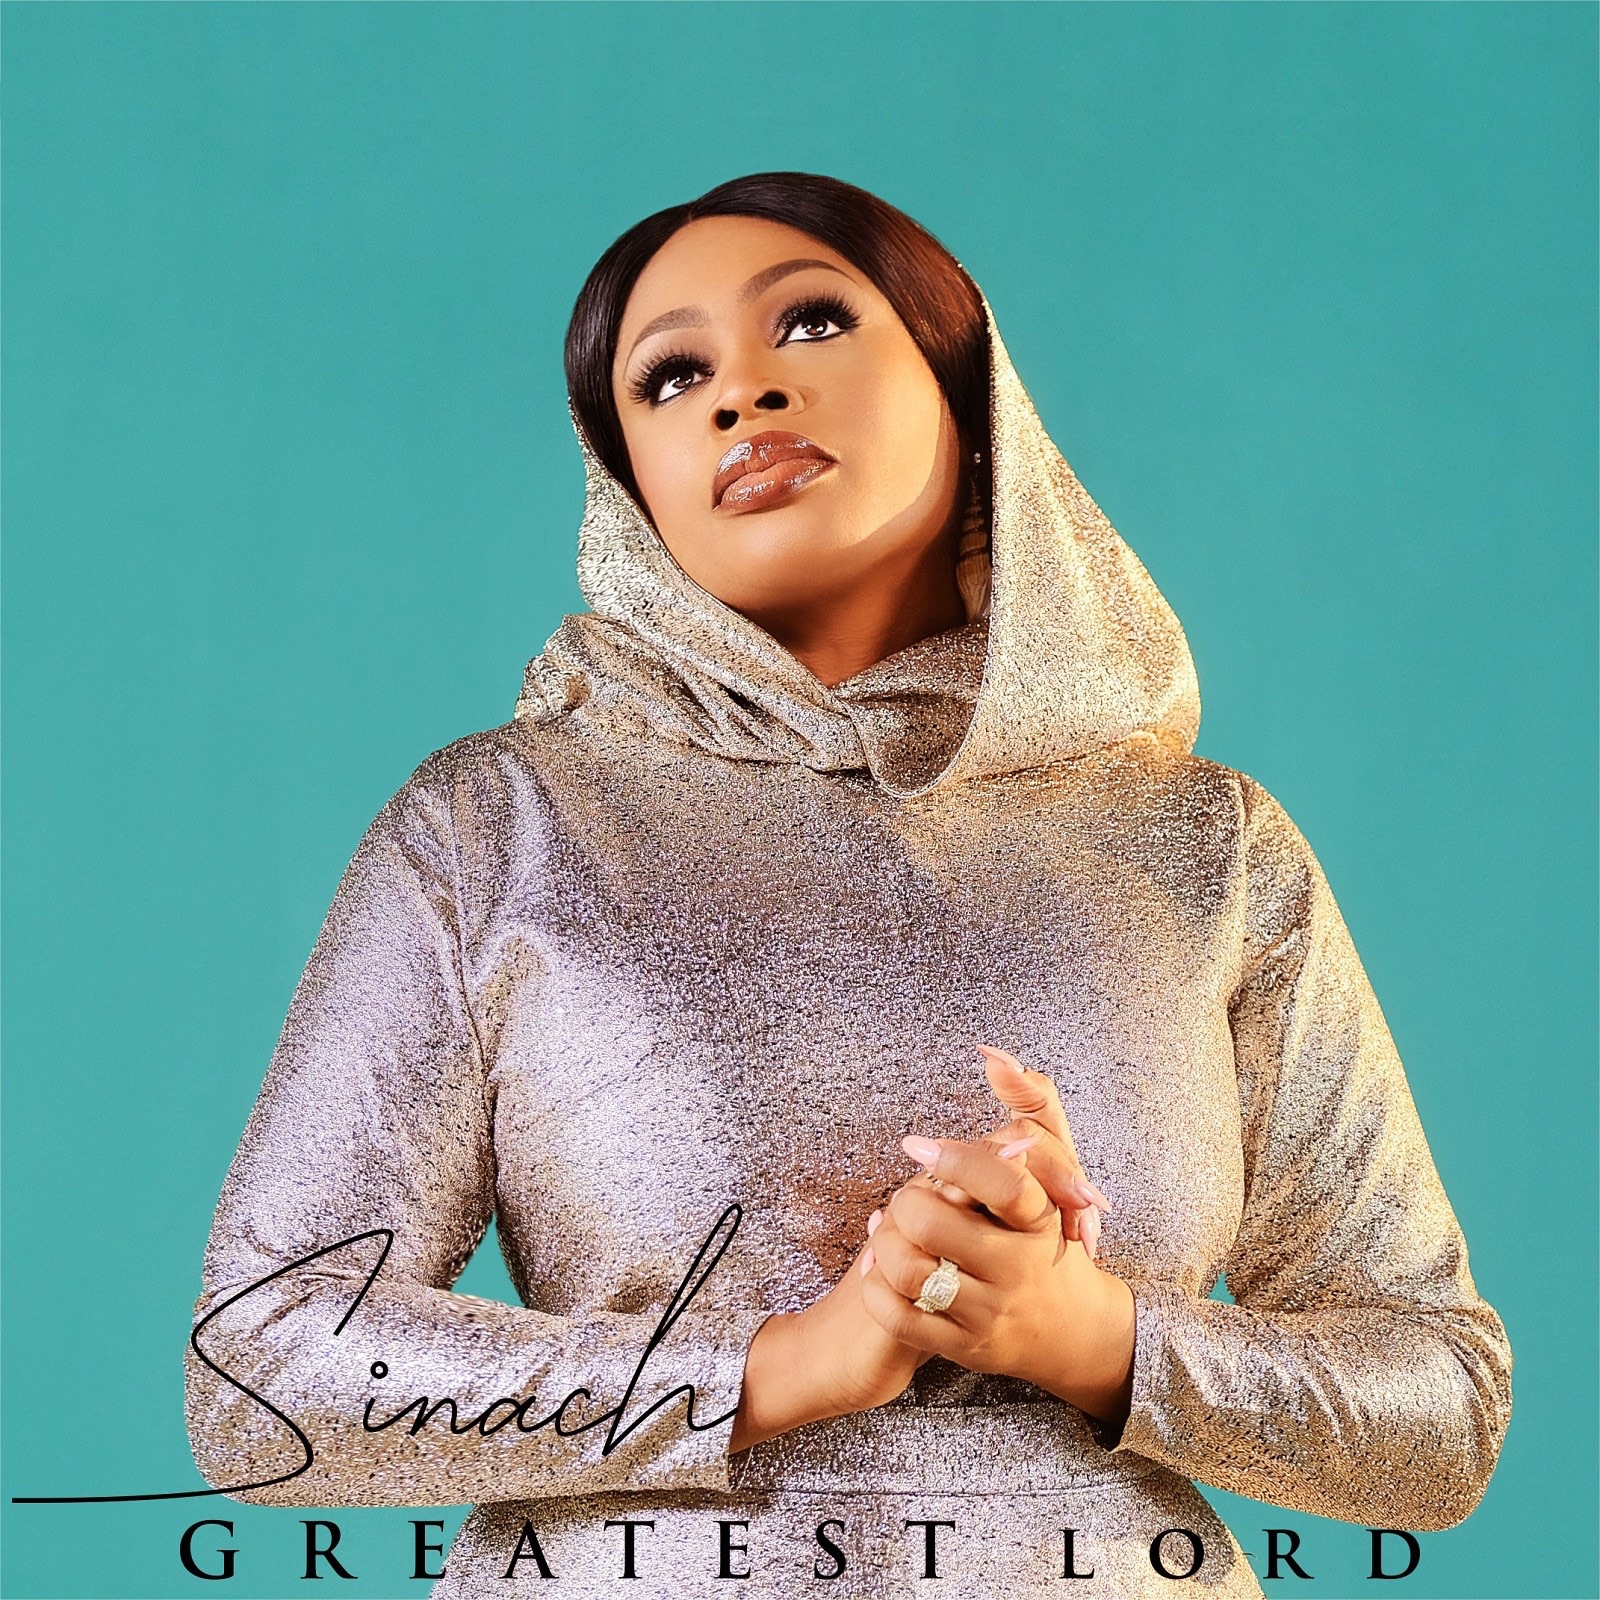 Art for Greatest Lord by Sinach